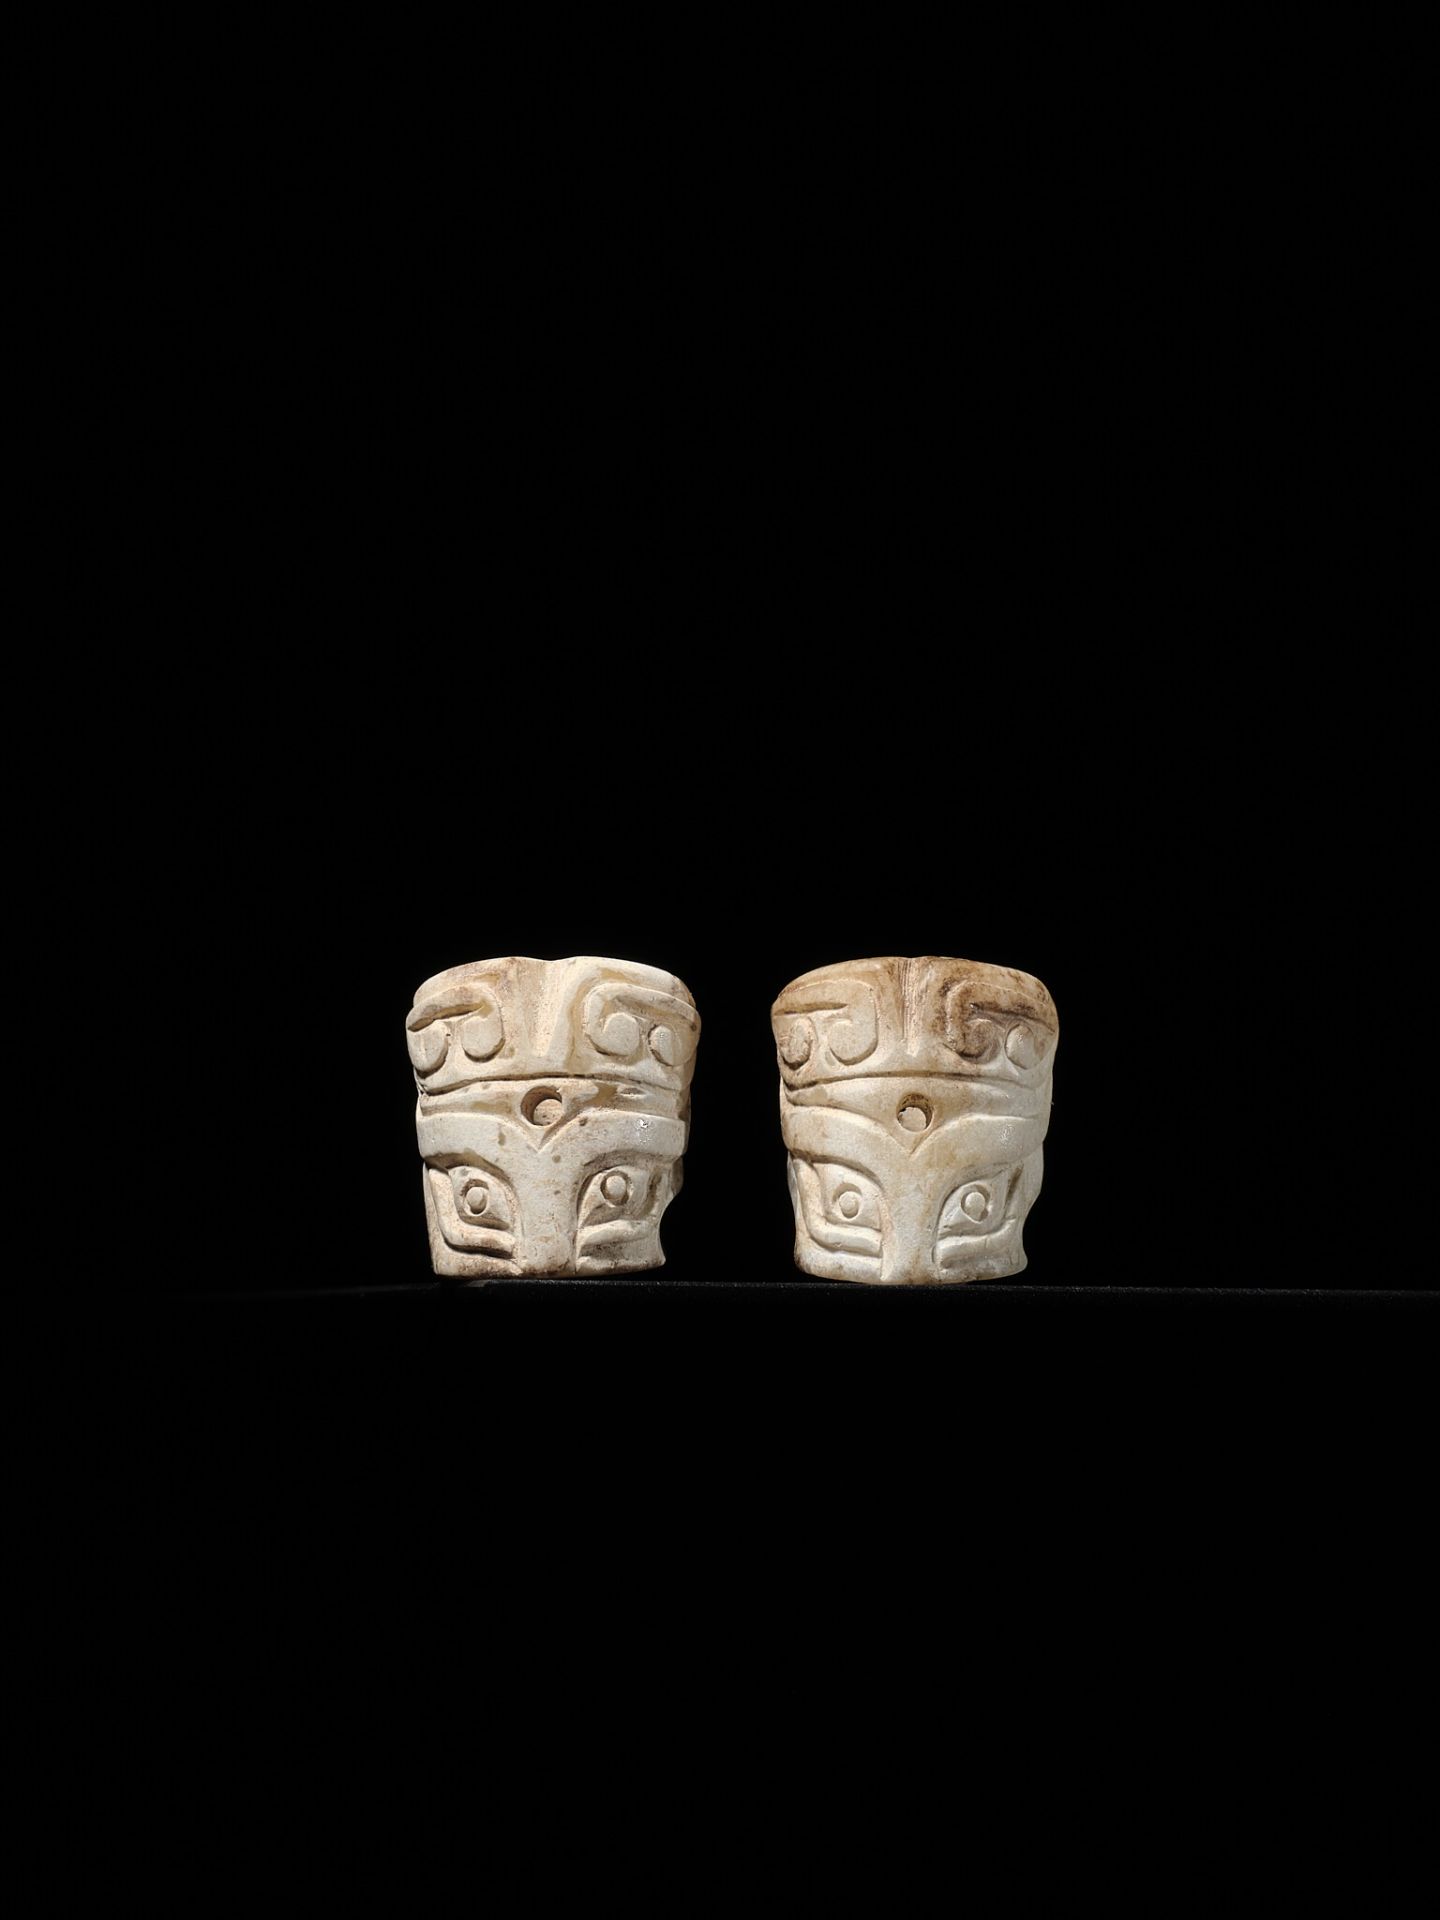 A PAIR OF CYLINDRICAL 'TAOTIE MASK' JADE BEADS, SHANG DYNASTY - Image 9 of 13